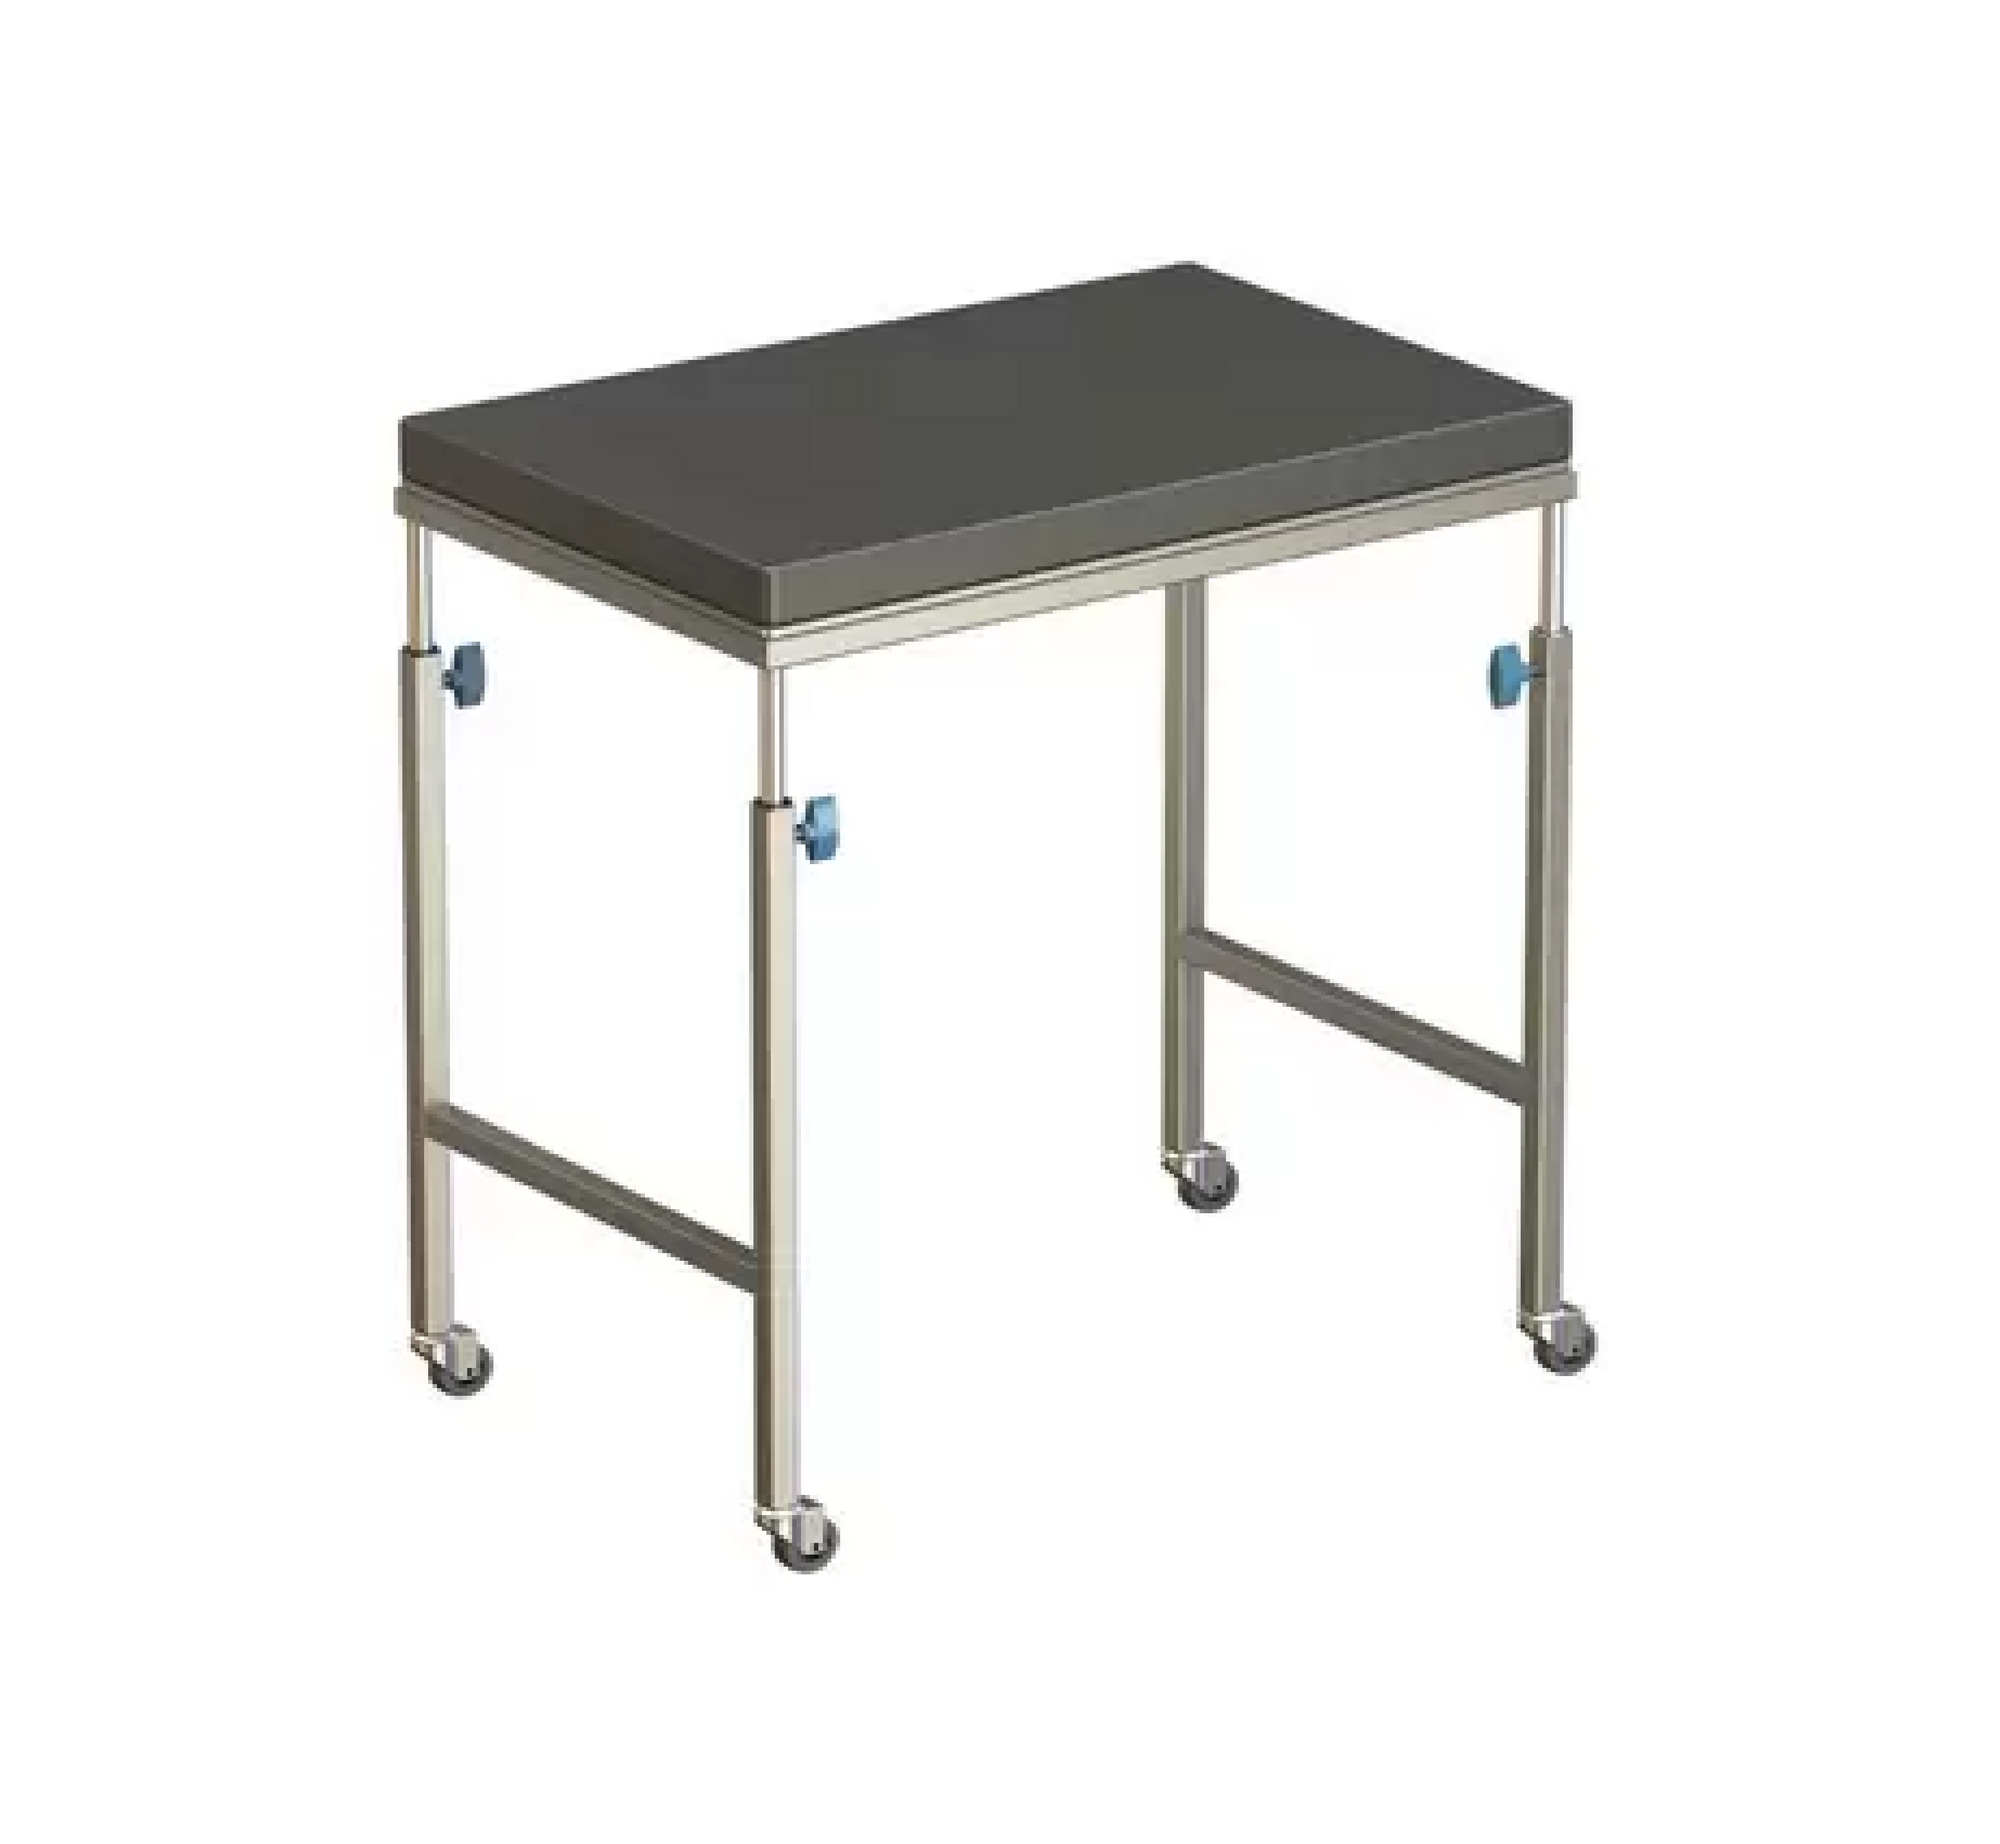 Hipac Mobile Arm Table - Surgical Product